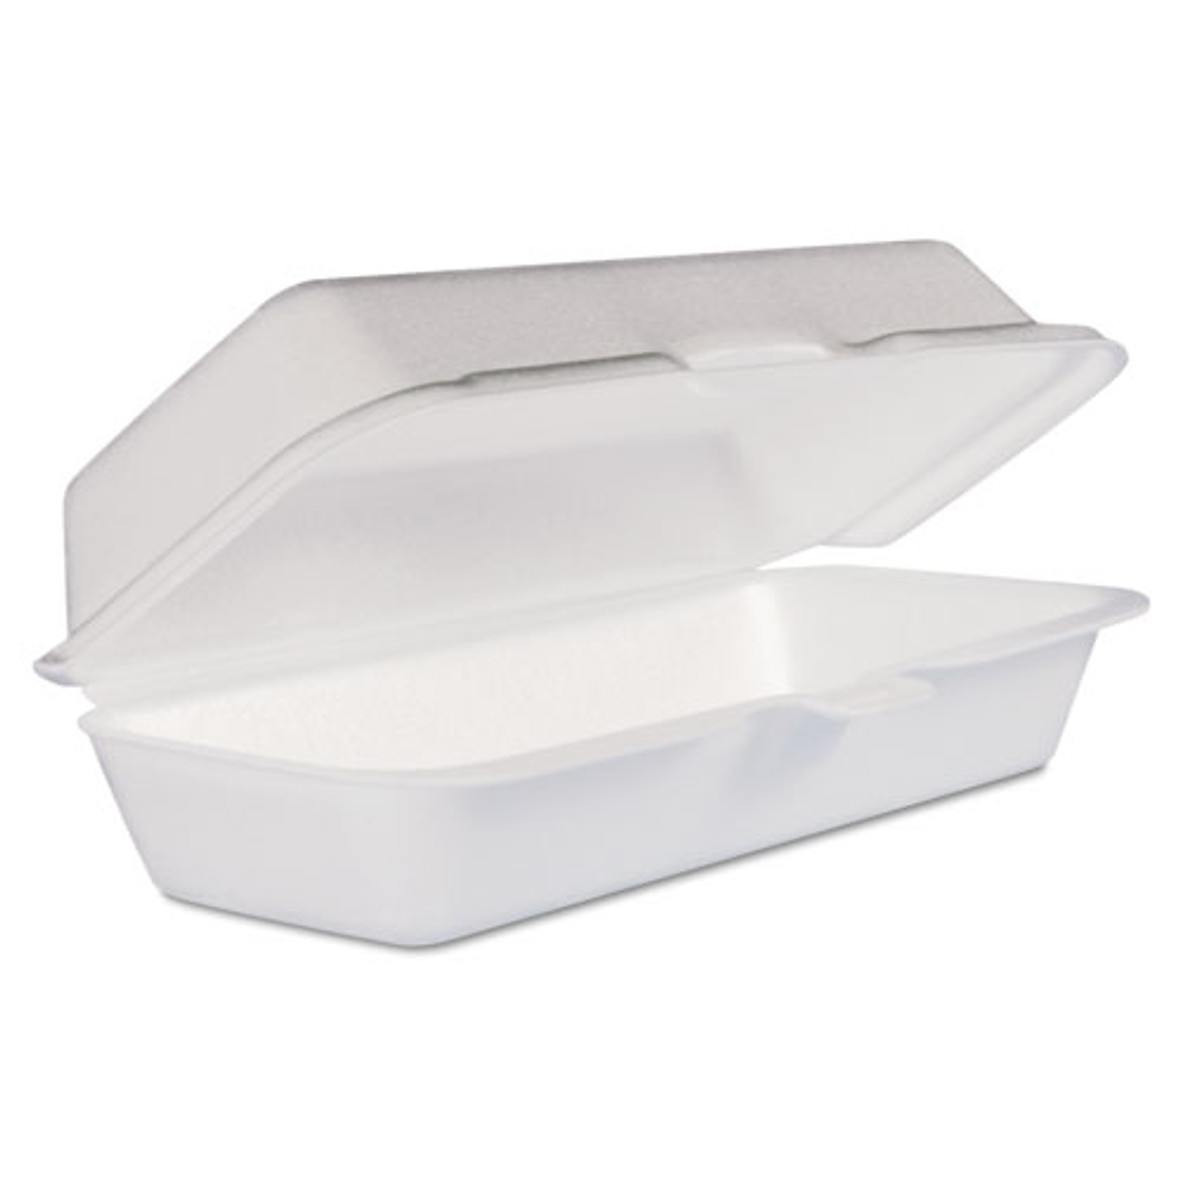 Dart Foam Hinged Lid Container, Hot Dog Container, 3.8 X 7.1 X 2.3, White,125/bag, 4 Bags/carton